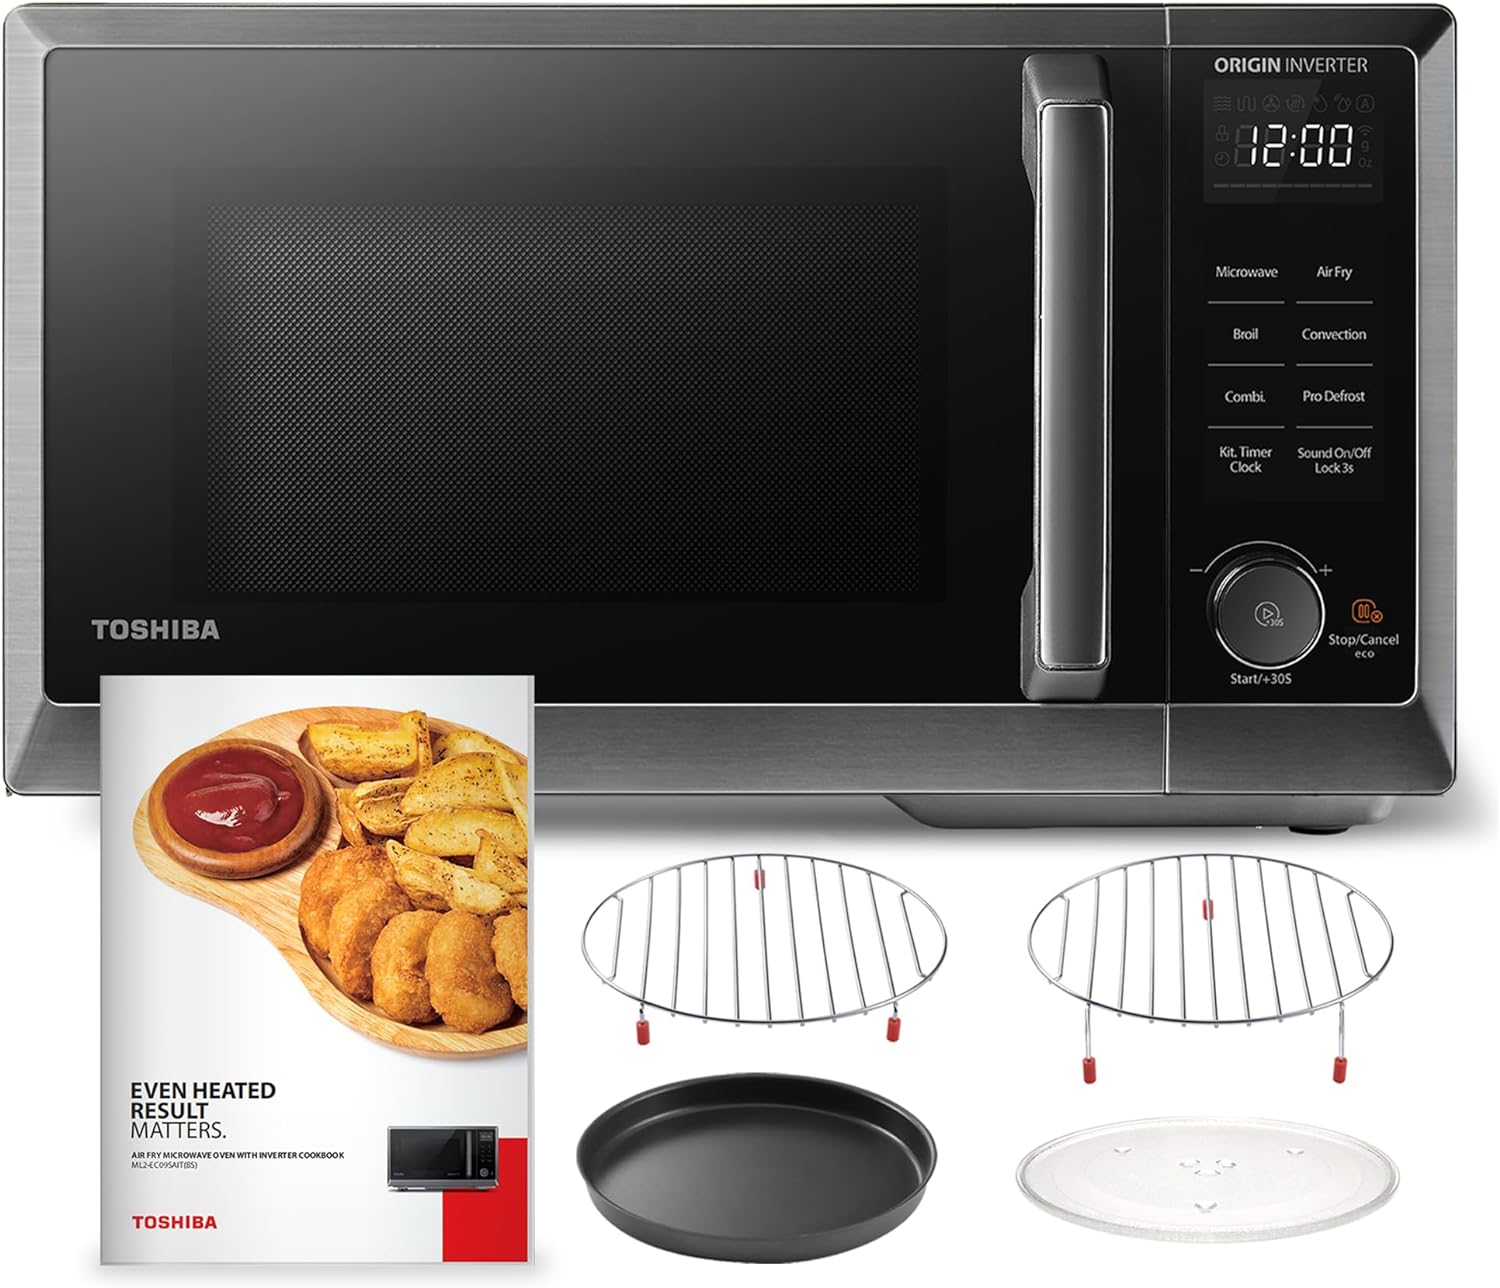 TOSHIBA 6-in-1 Inverter Countertop Microwave Oven Healthy Air Fryer Combo